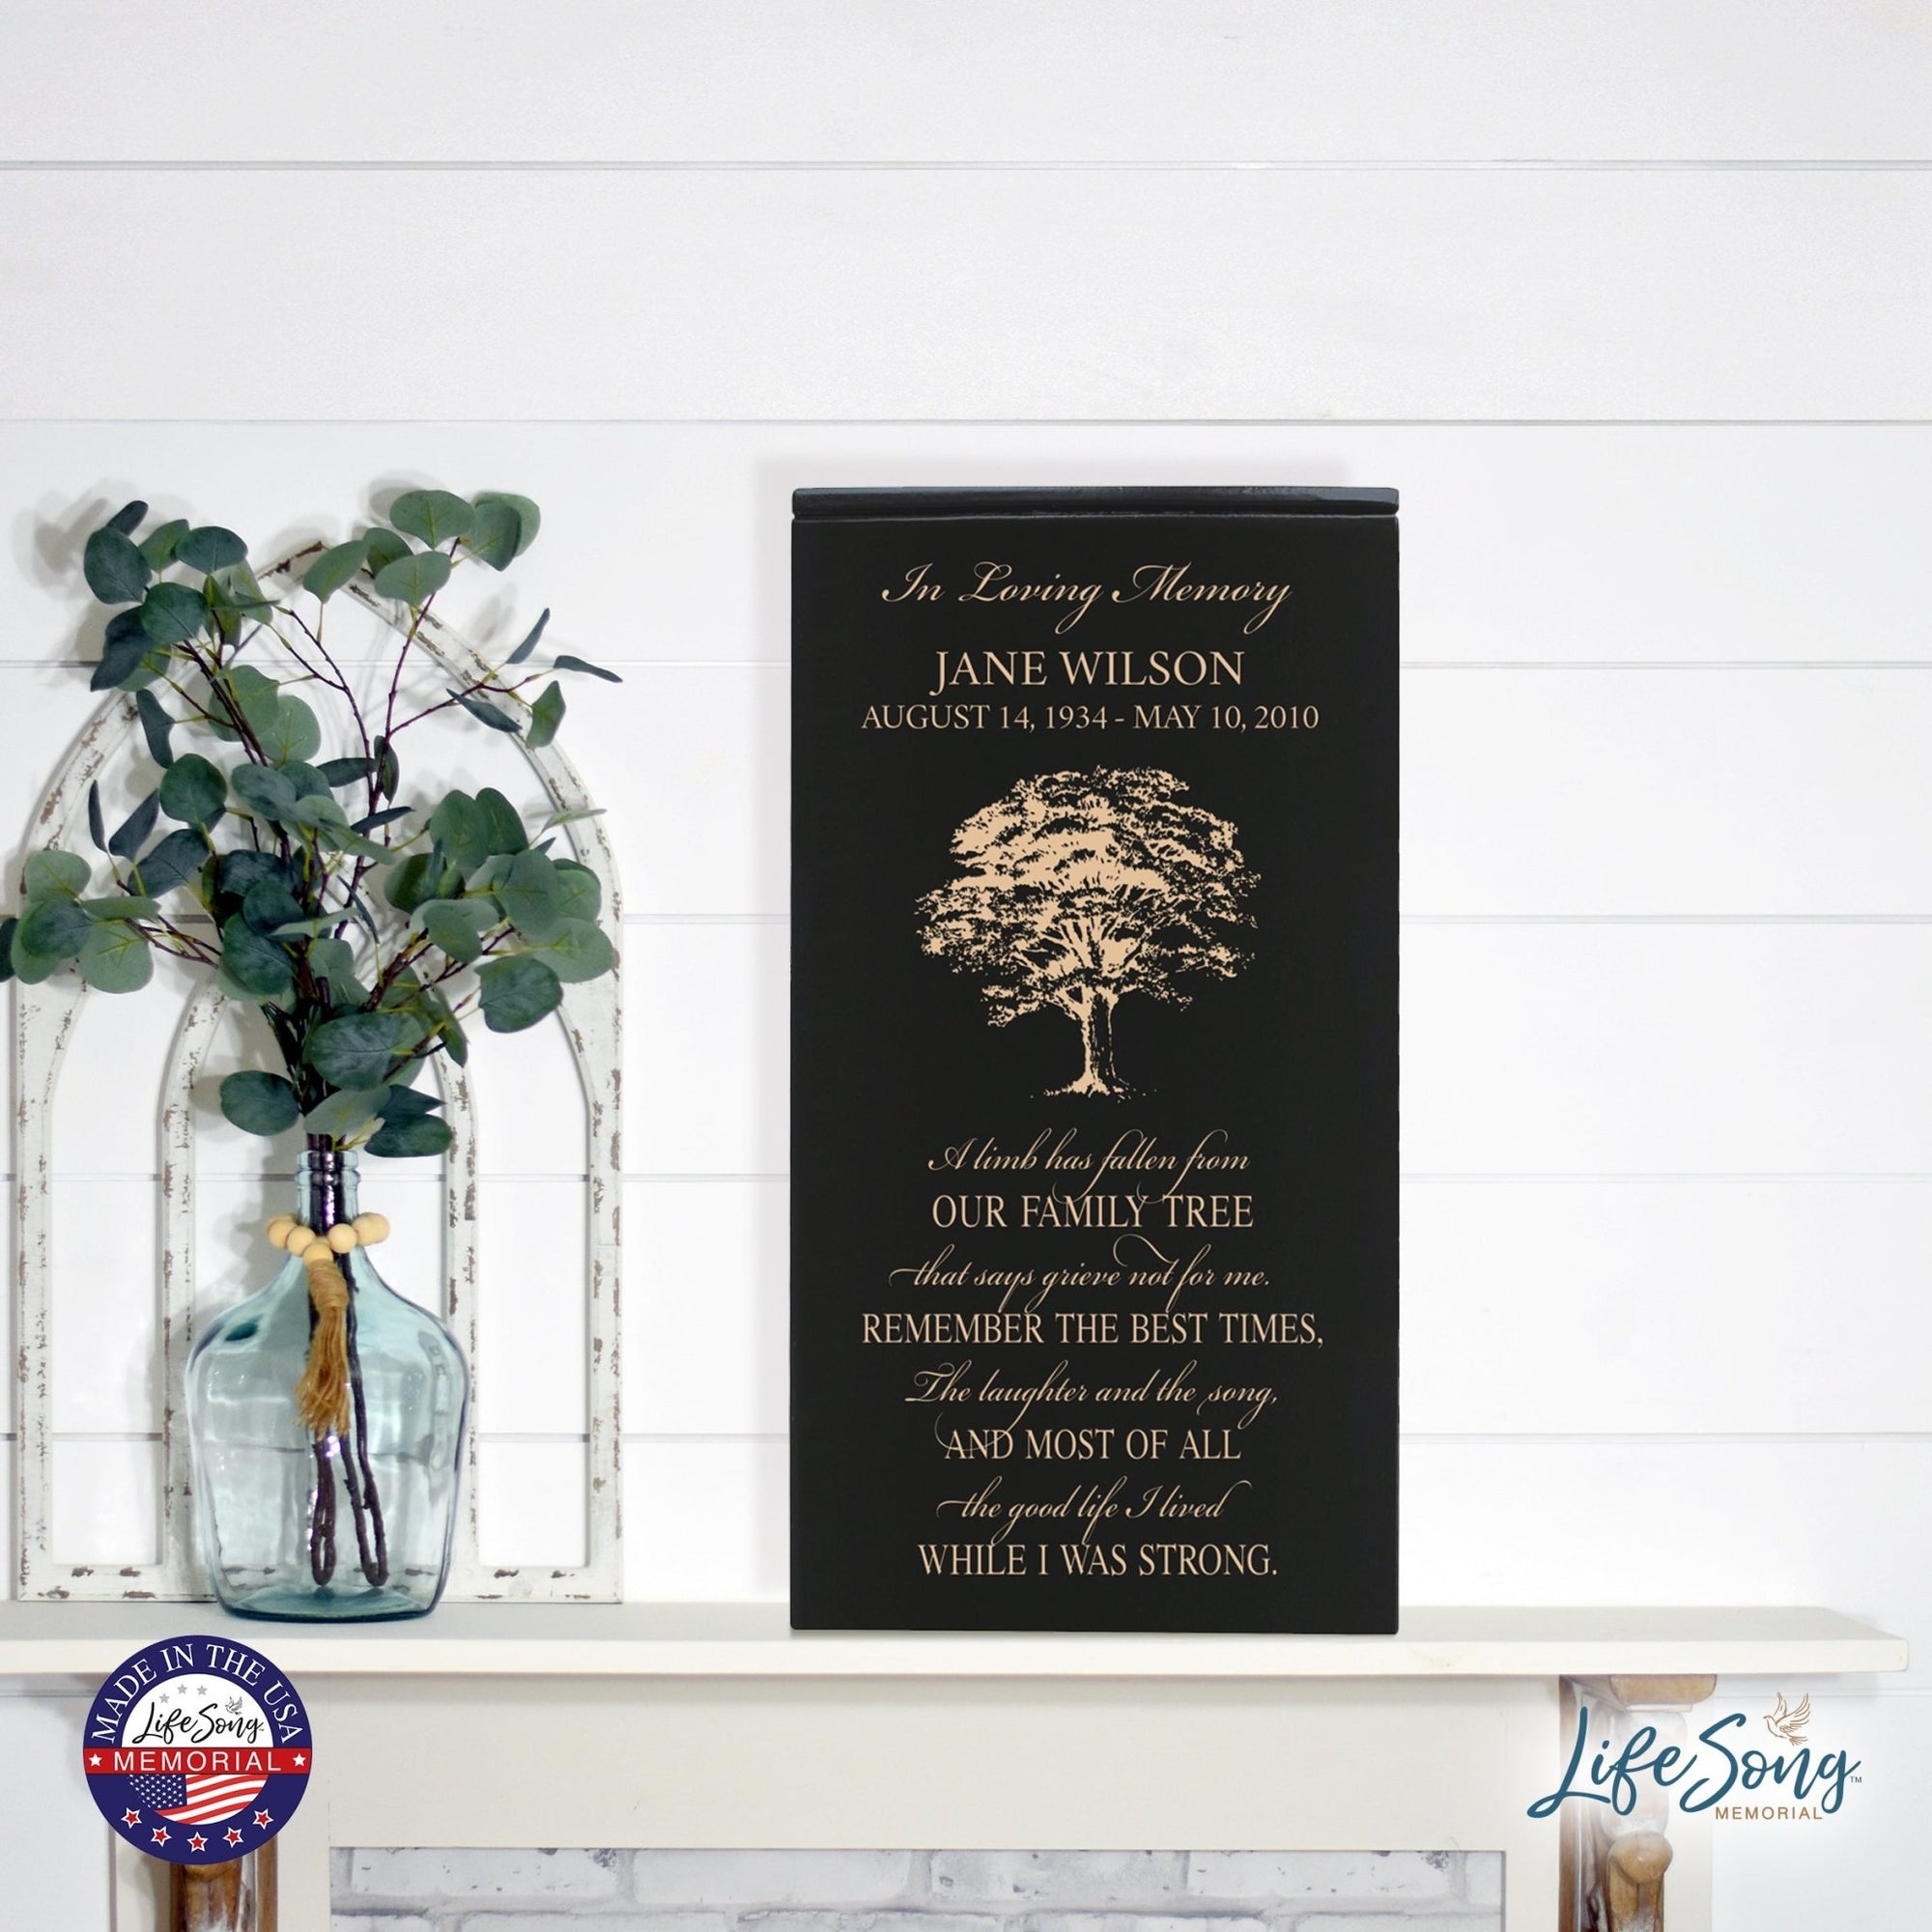 Custom Engraved Memorial Cremation Keepsake Urn Box Holds 100 Cu Inches Of Human Ashes A Limb Has Fallen - LifeSong Milestones